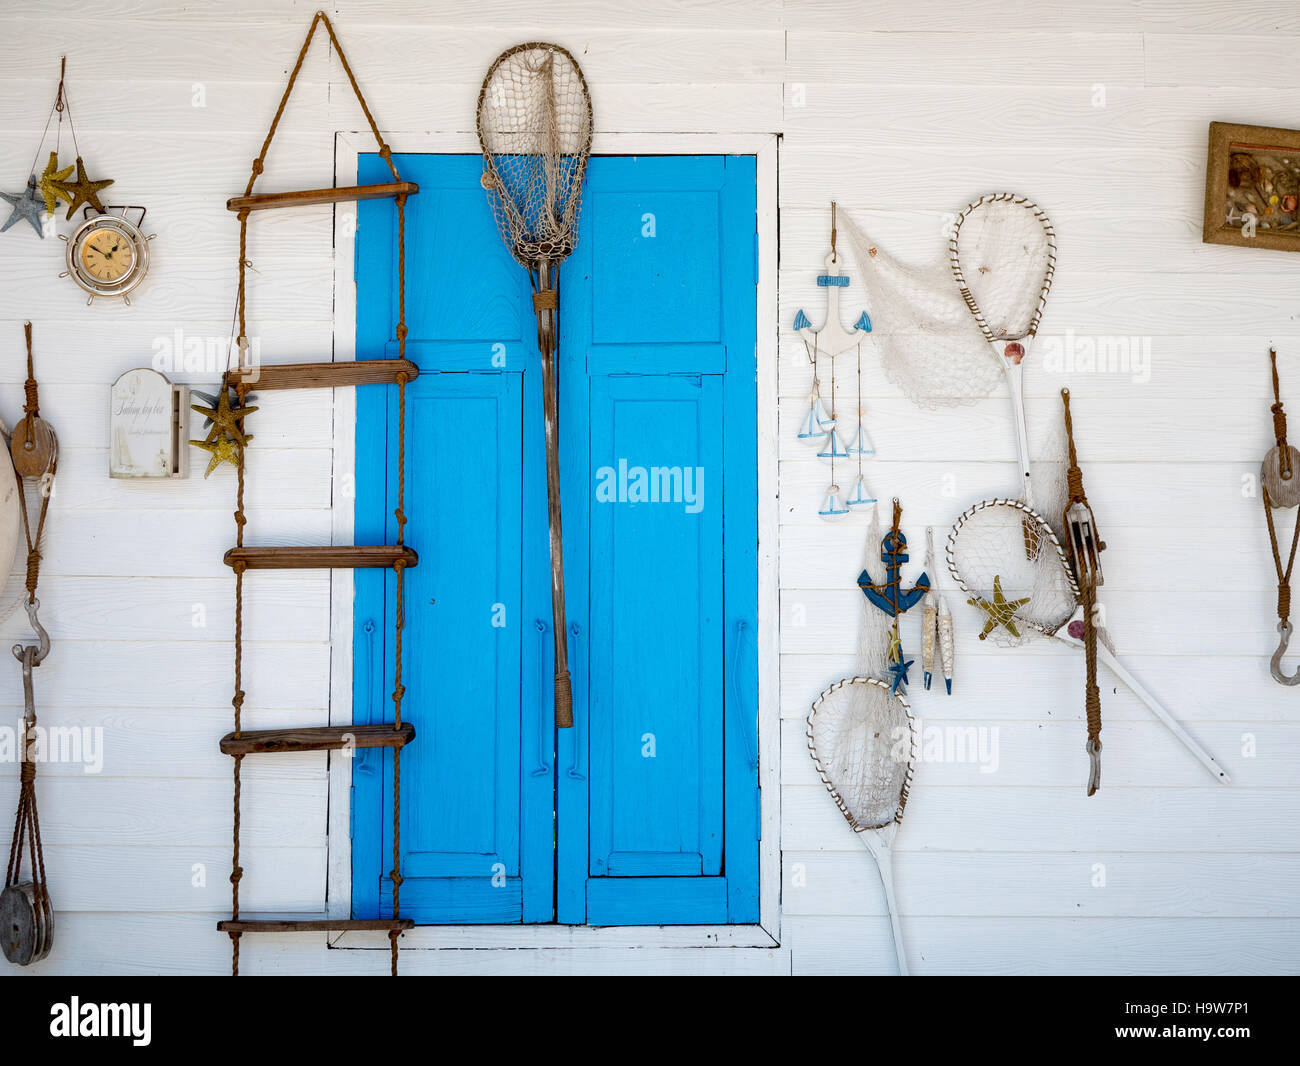 Beach fishing decoration in a white wall with blue window Stock Photo